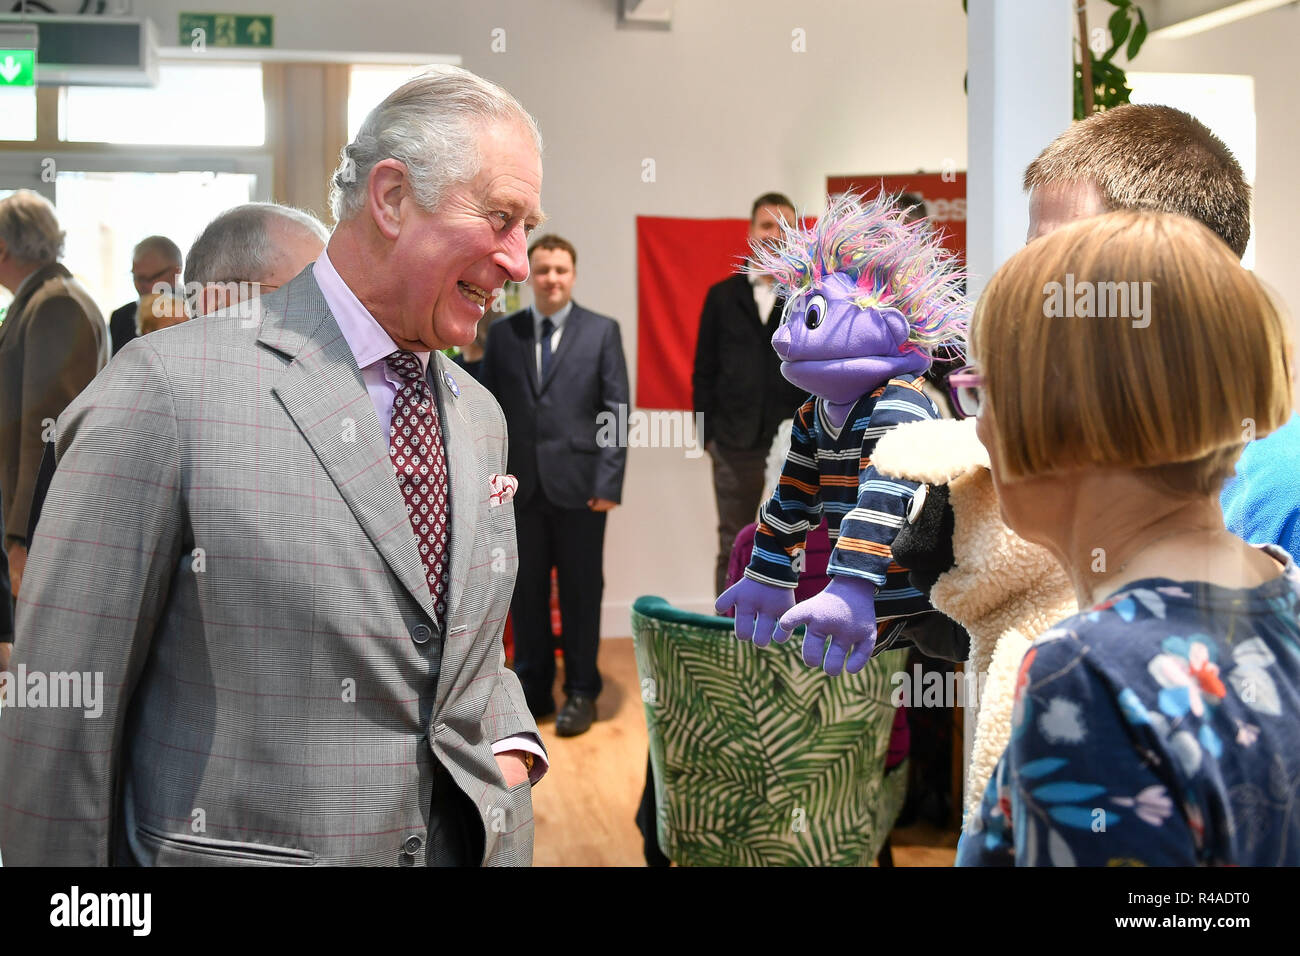 The Prince of Wales laughs as he meets Bob the puppet in Dorchester Community Church, Poundbury, Dorset, where he is opening the church and Yarlington Housing Group's new Extra Care housing development. Stock Photo